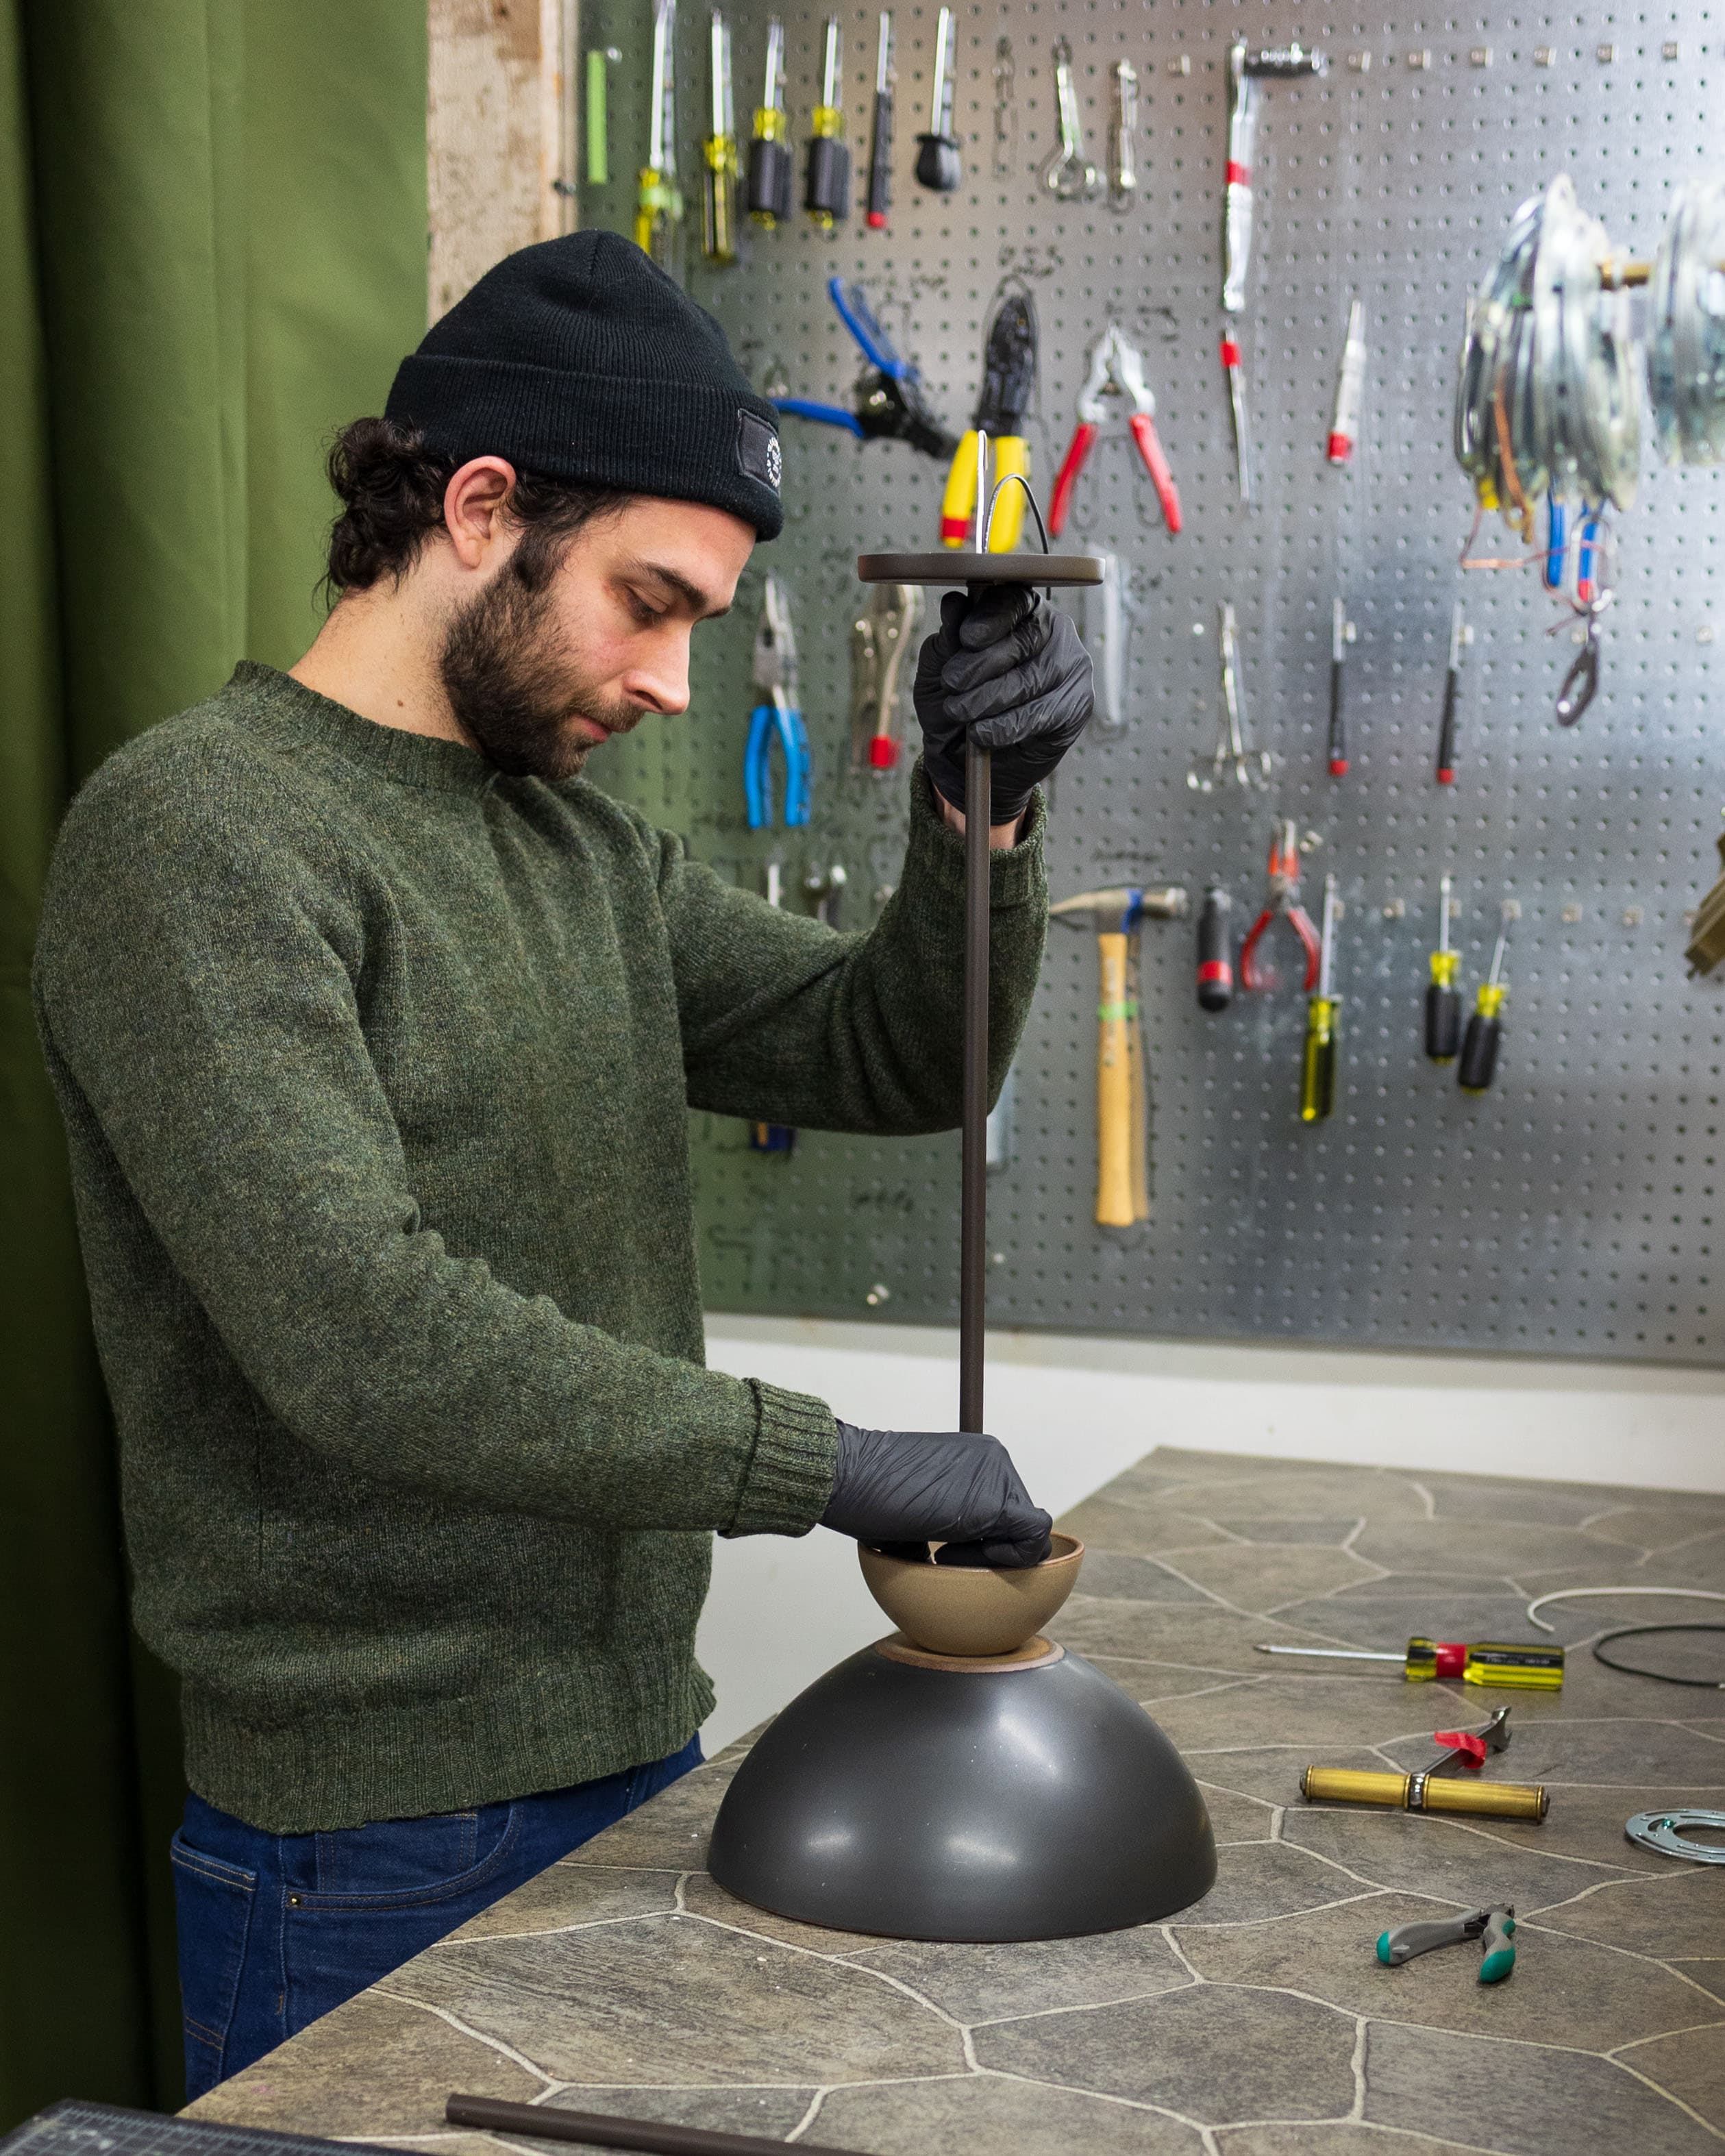 A person assembling a light fixture made from East Fork bowls in front of a wall of handtools